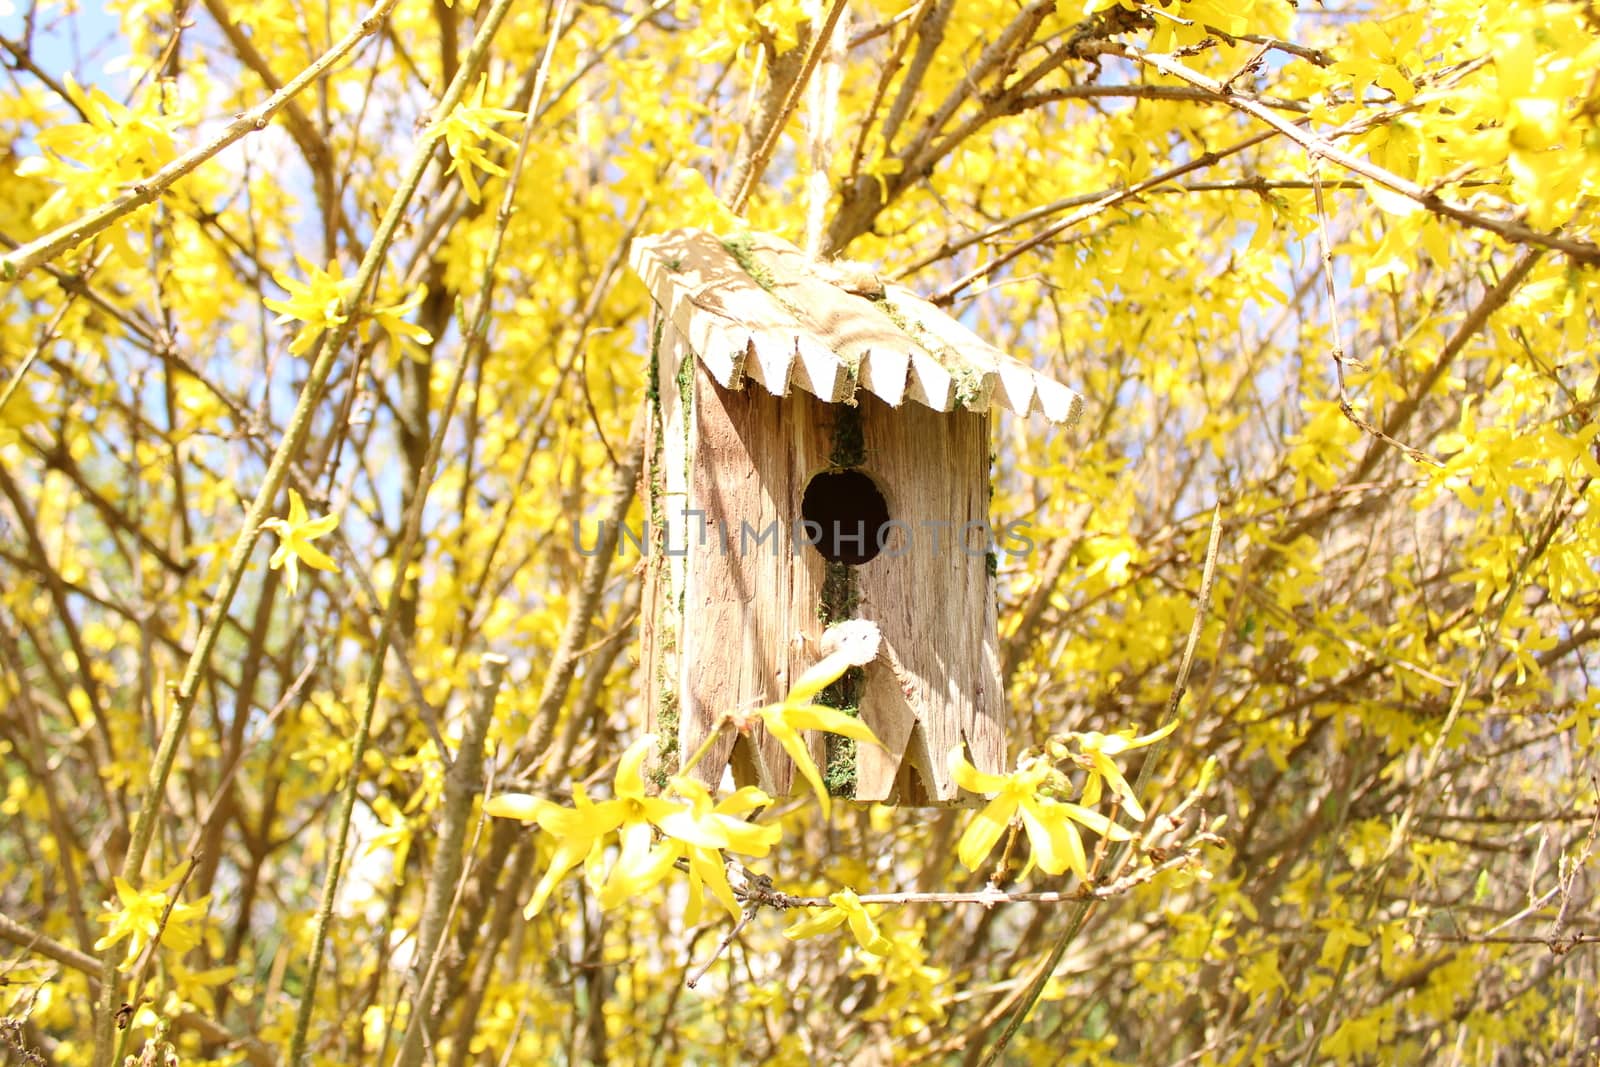 The picture shows a bird house in the blossoming forsythia.